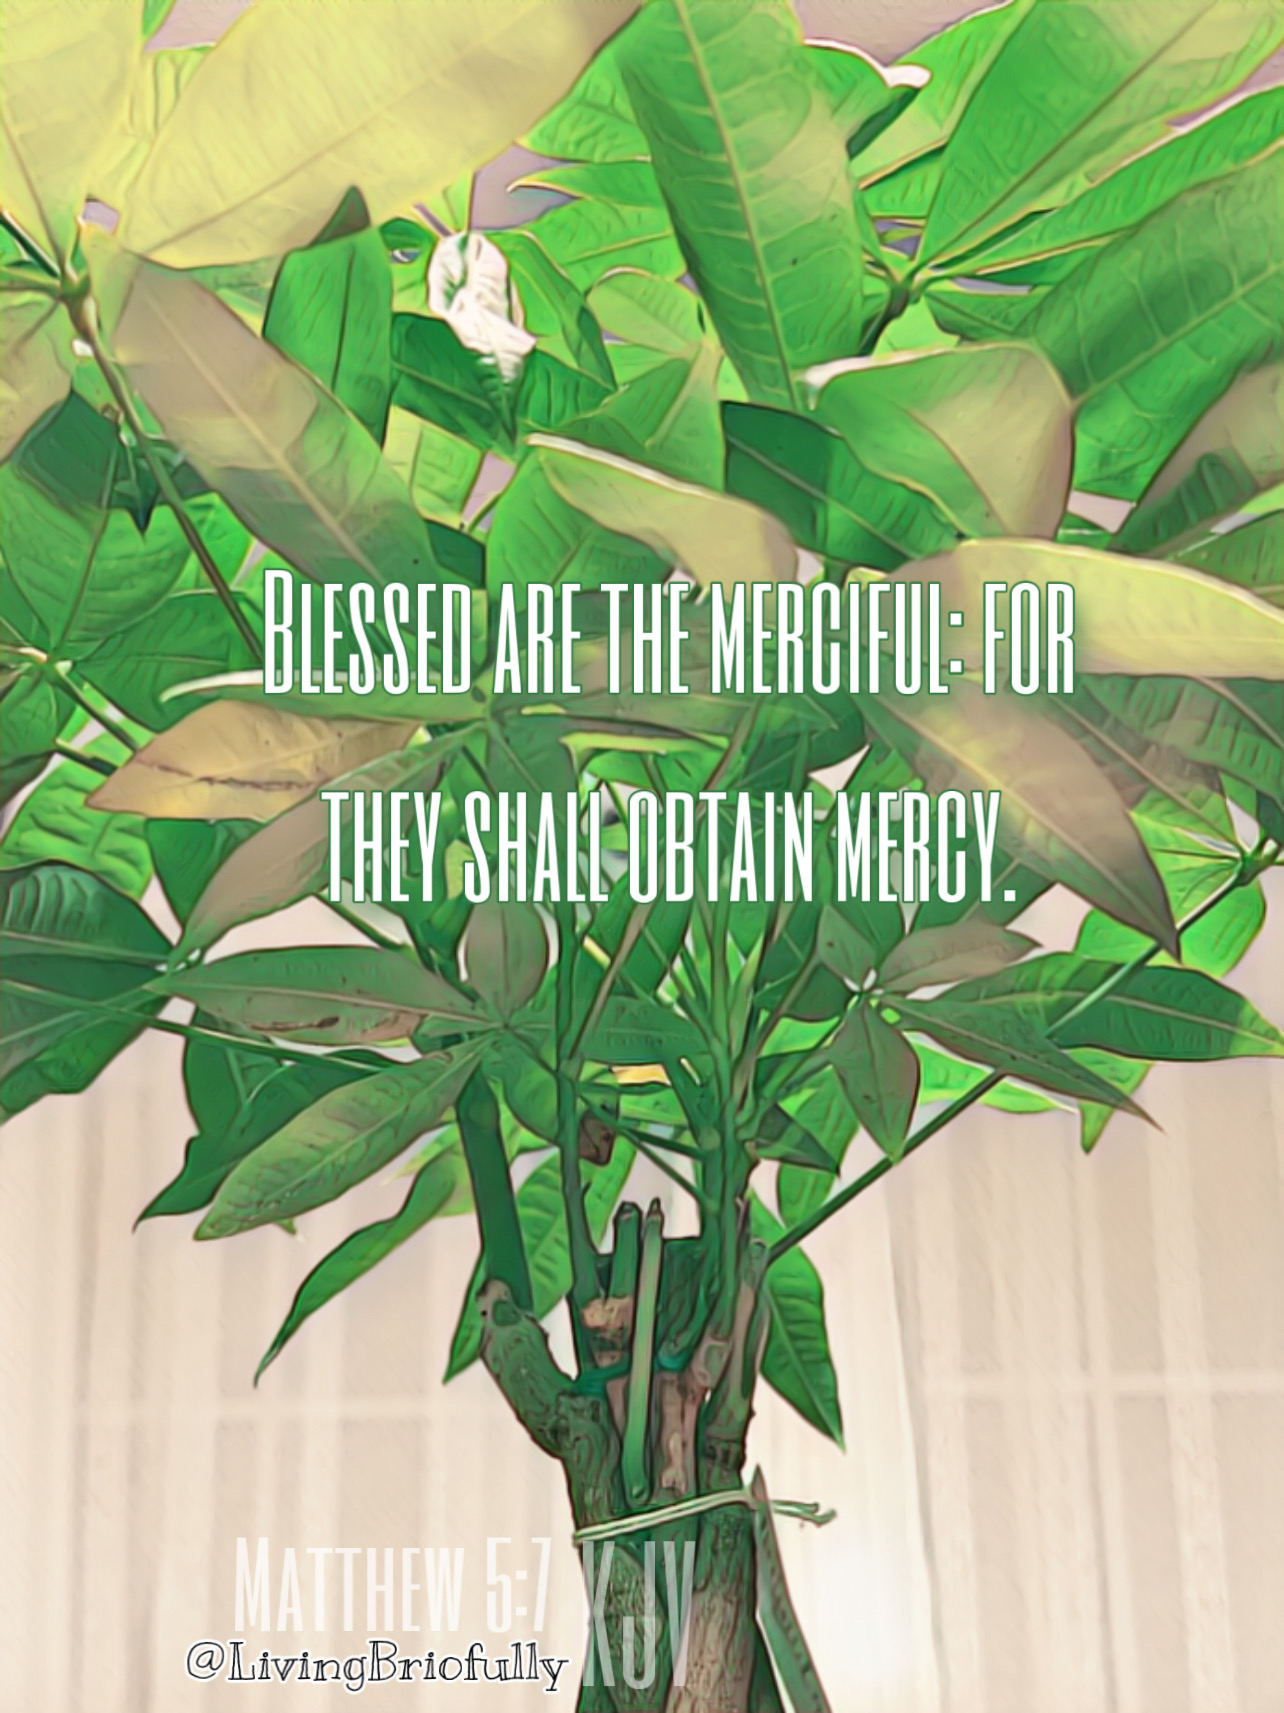 " Blessed are the merciful: for they shall obtain mercy." Matthew 5:7 KJV